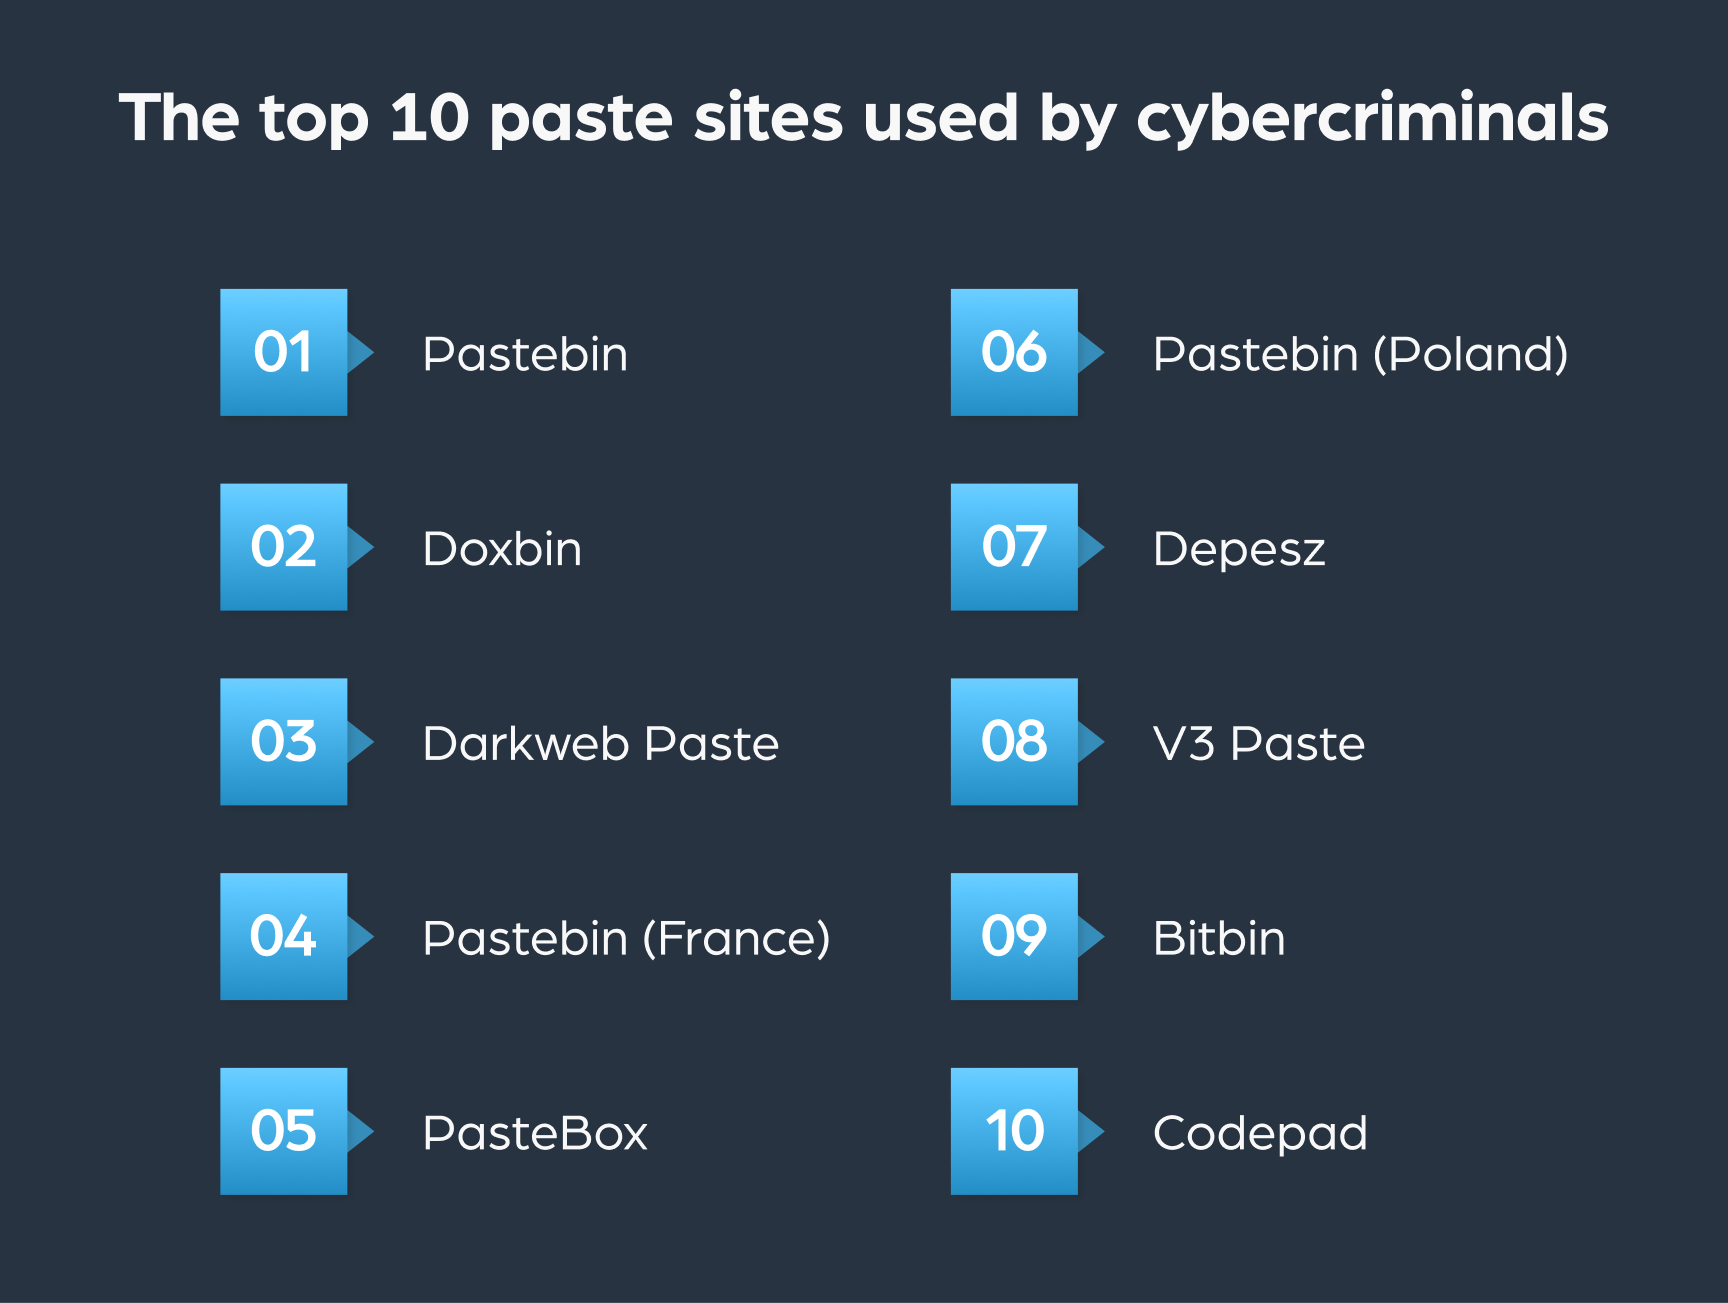 Top 10 paste sites that are used by cybercriminals are (from most popular to least popular): Pastebin, Darkweb Paste, Pastebin (France), PasteBox, Pastebin (Poland), Depesz, V3 Paste, Bitbin, and Codepad